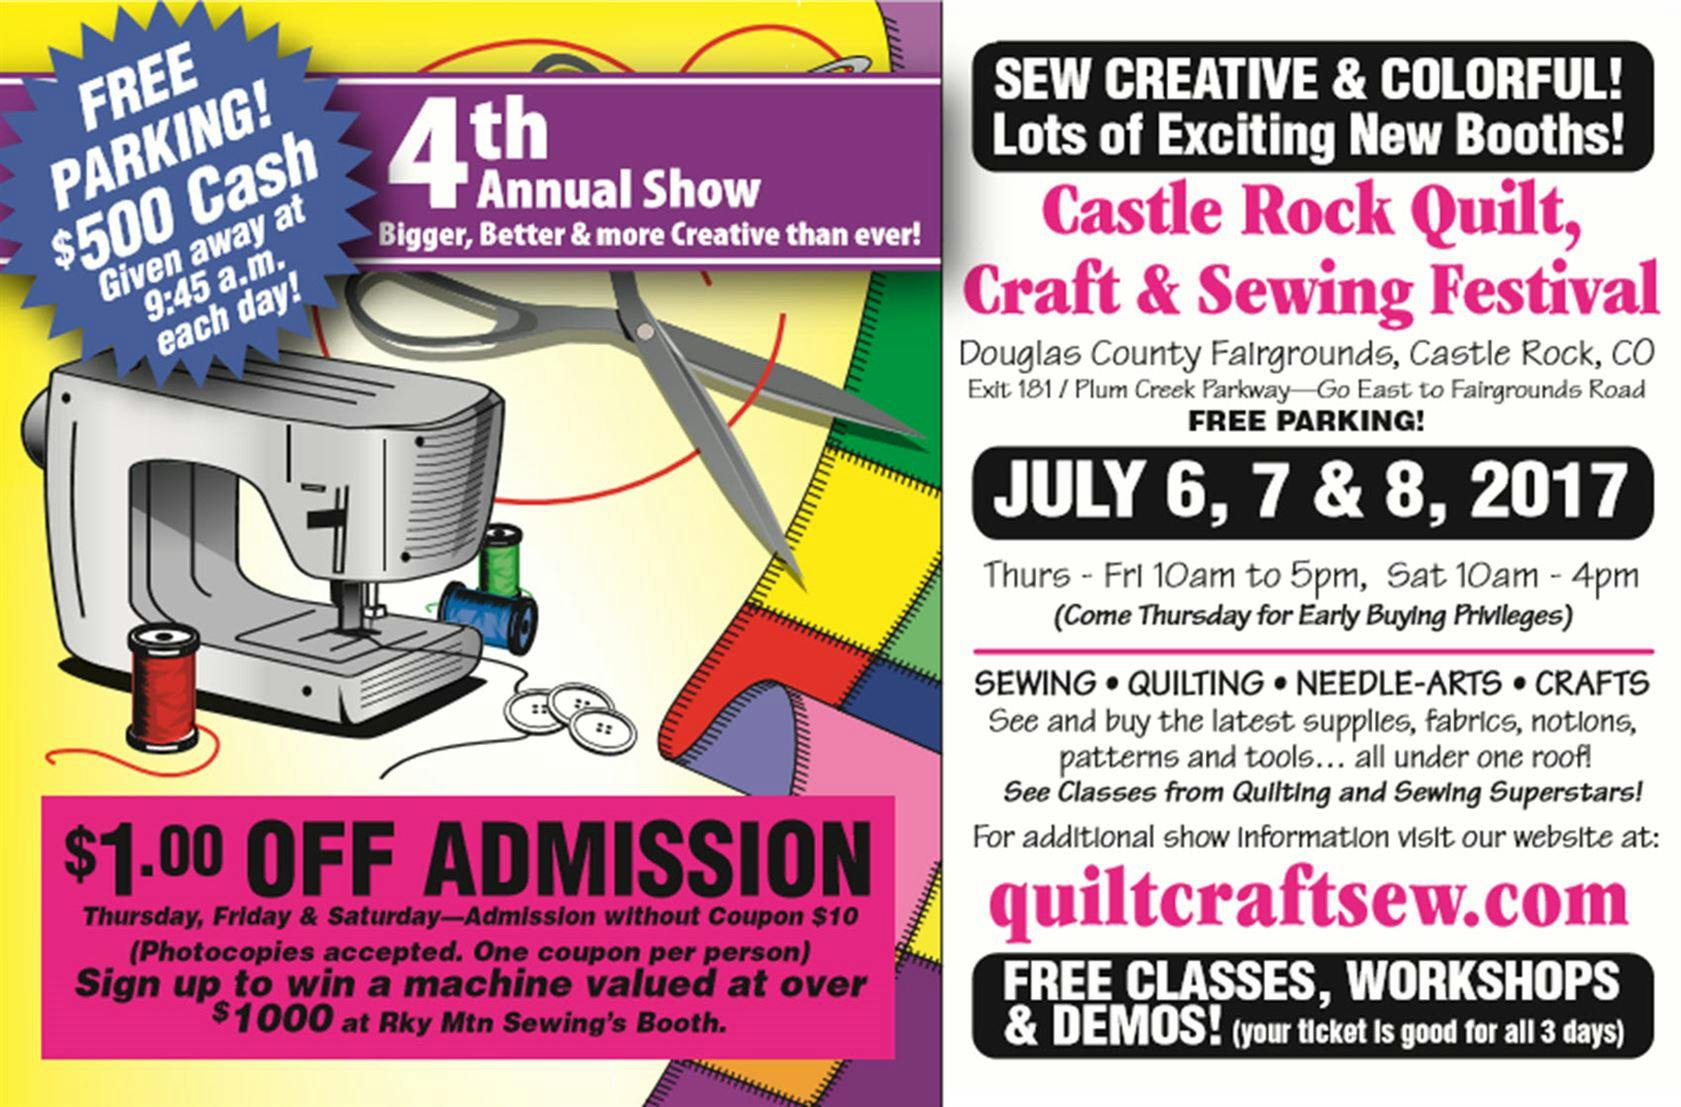 Postcard with information for the Rocky Mountain Quilt, Craft & Sewing Festival including coupon for $1.00 off admission